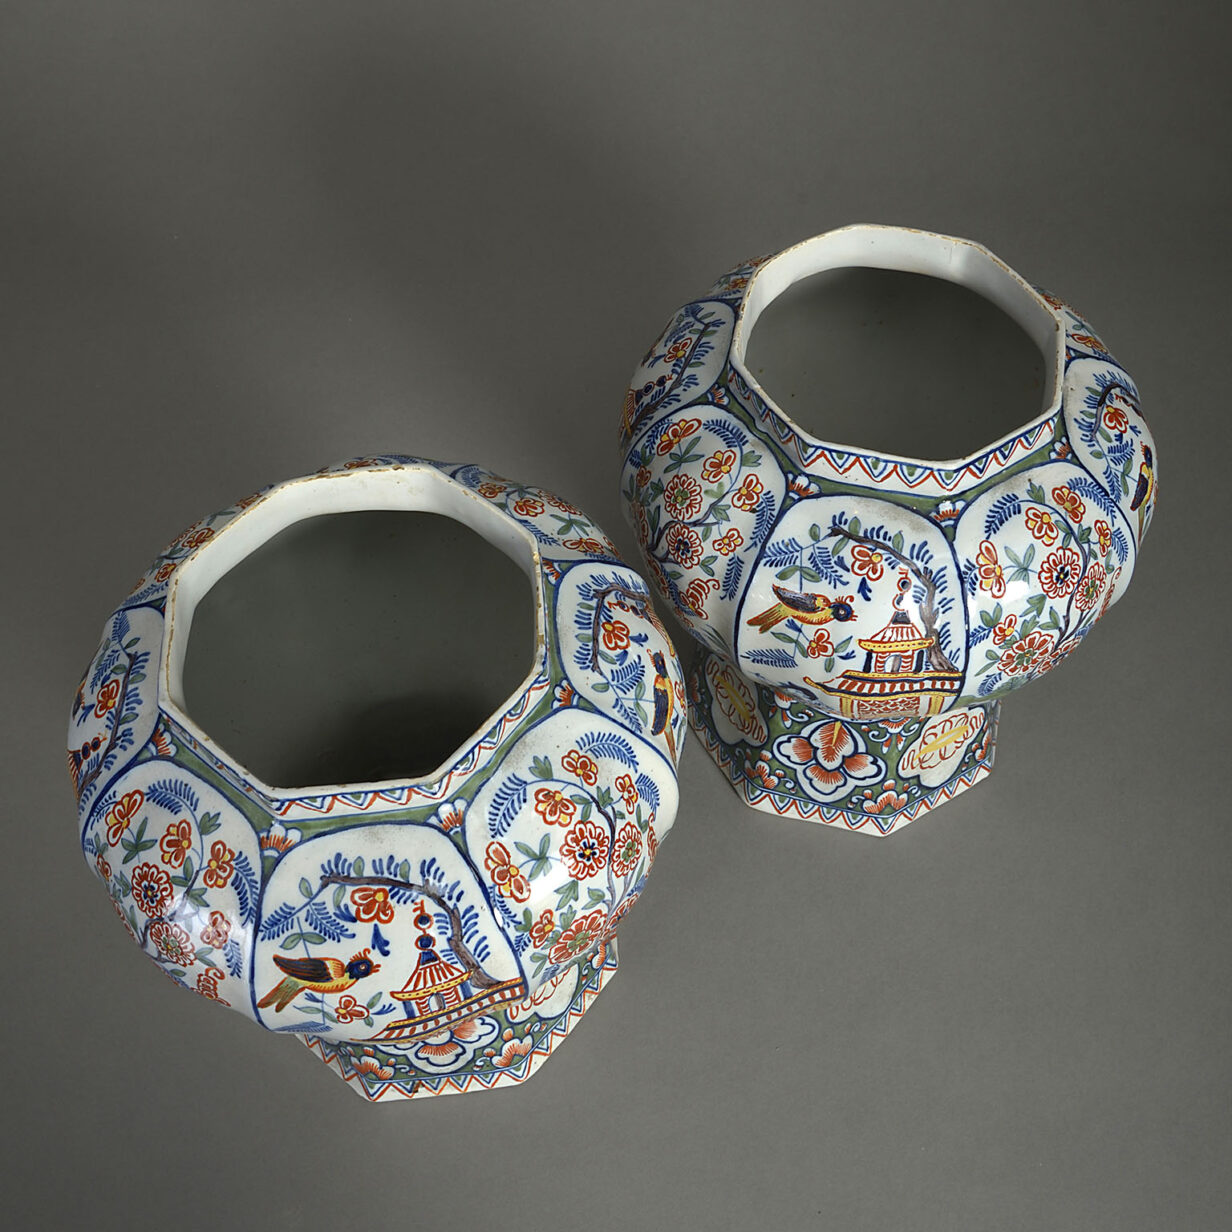 Pair of 19th Century Polychrome Faience Vases & Covers